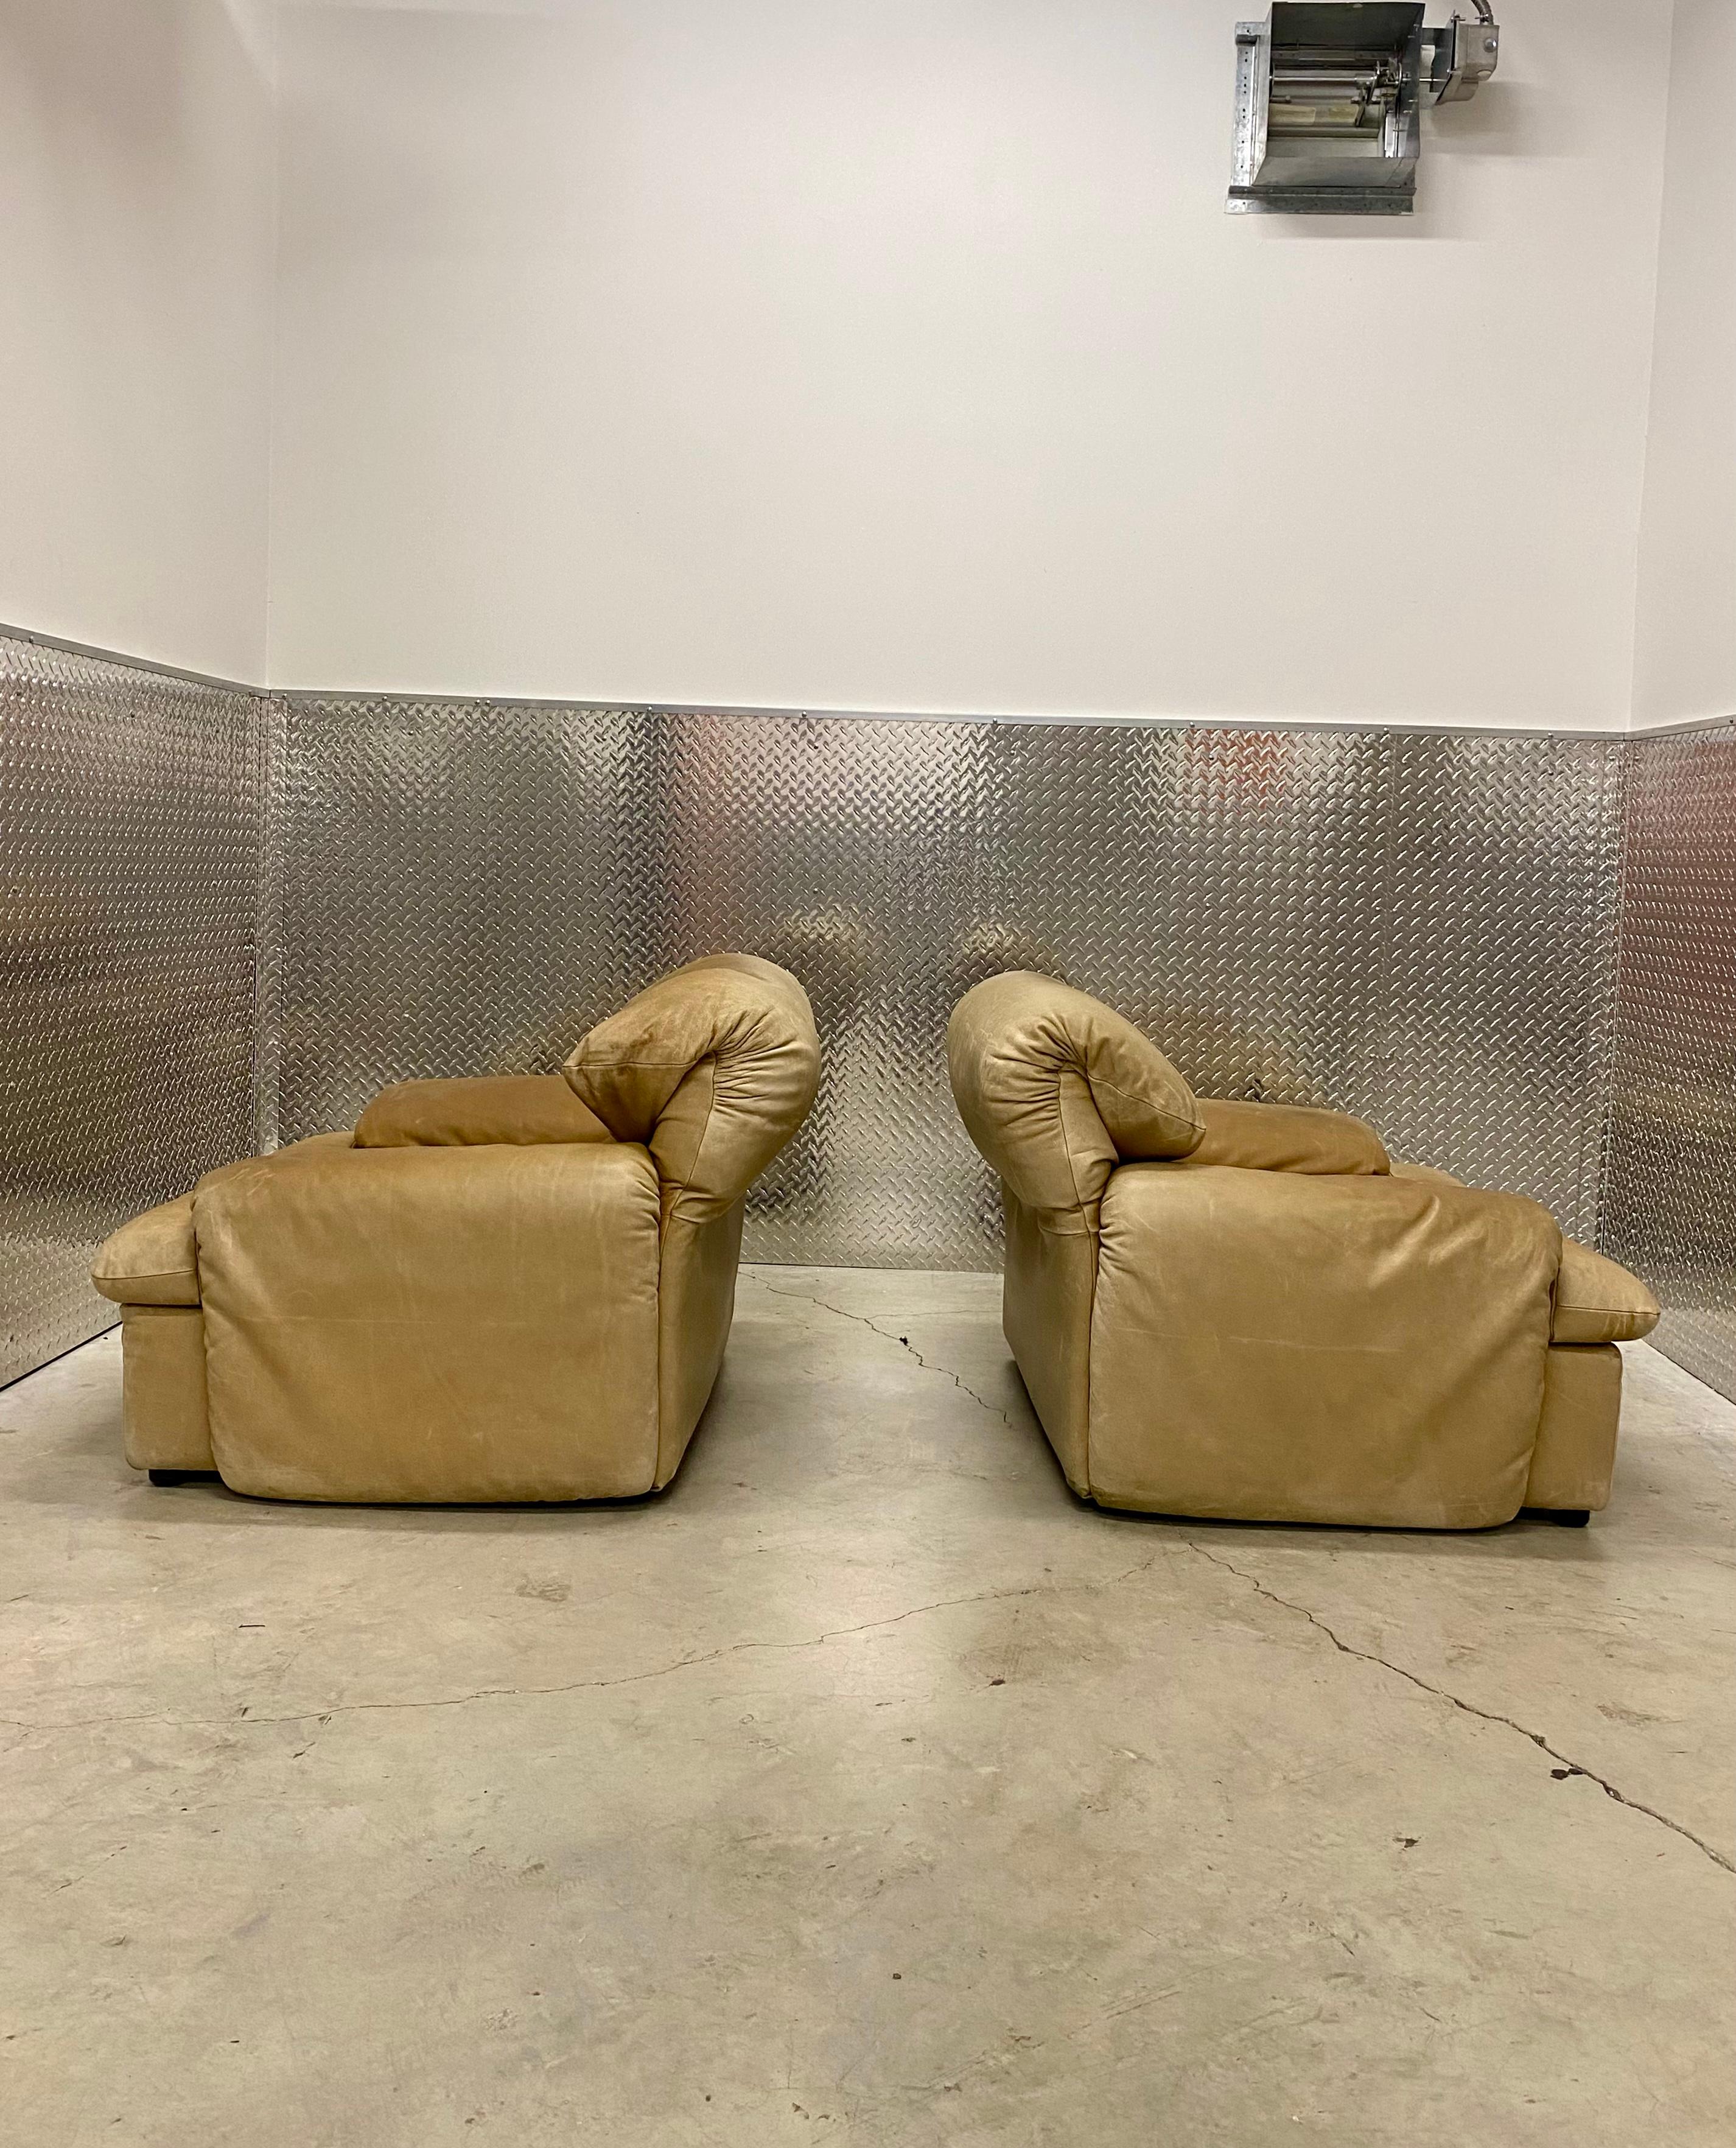 Italian Attributed to Cassina Rare Cube Maralunga Leather Chairs and Ottoman, Set of 3 For Sale